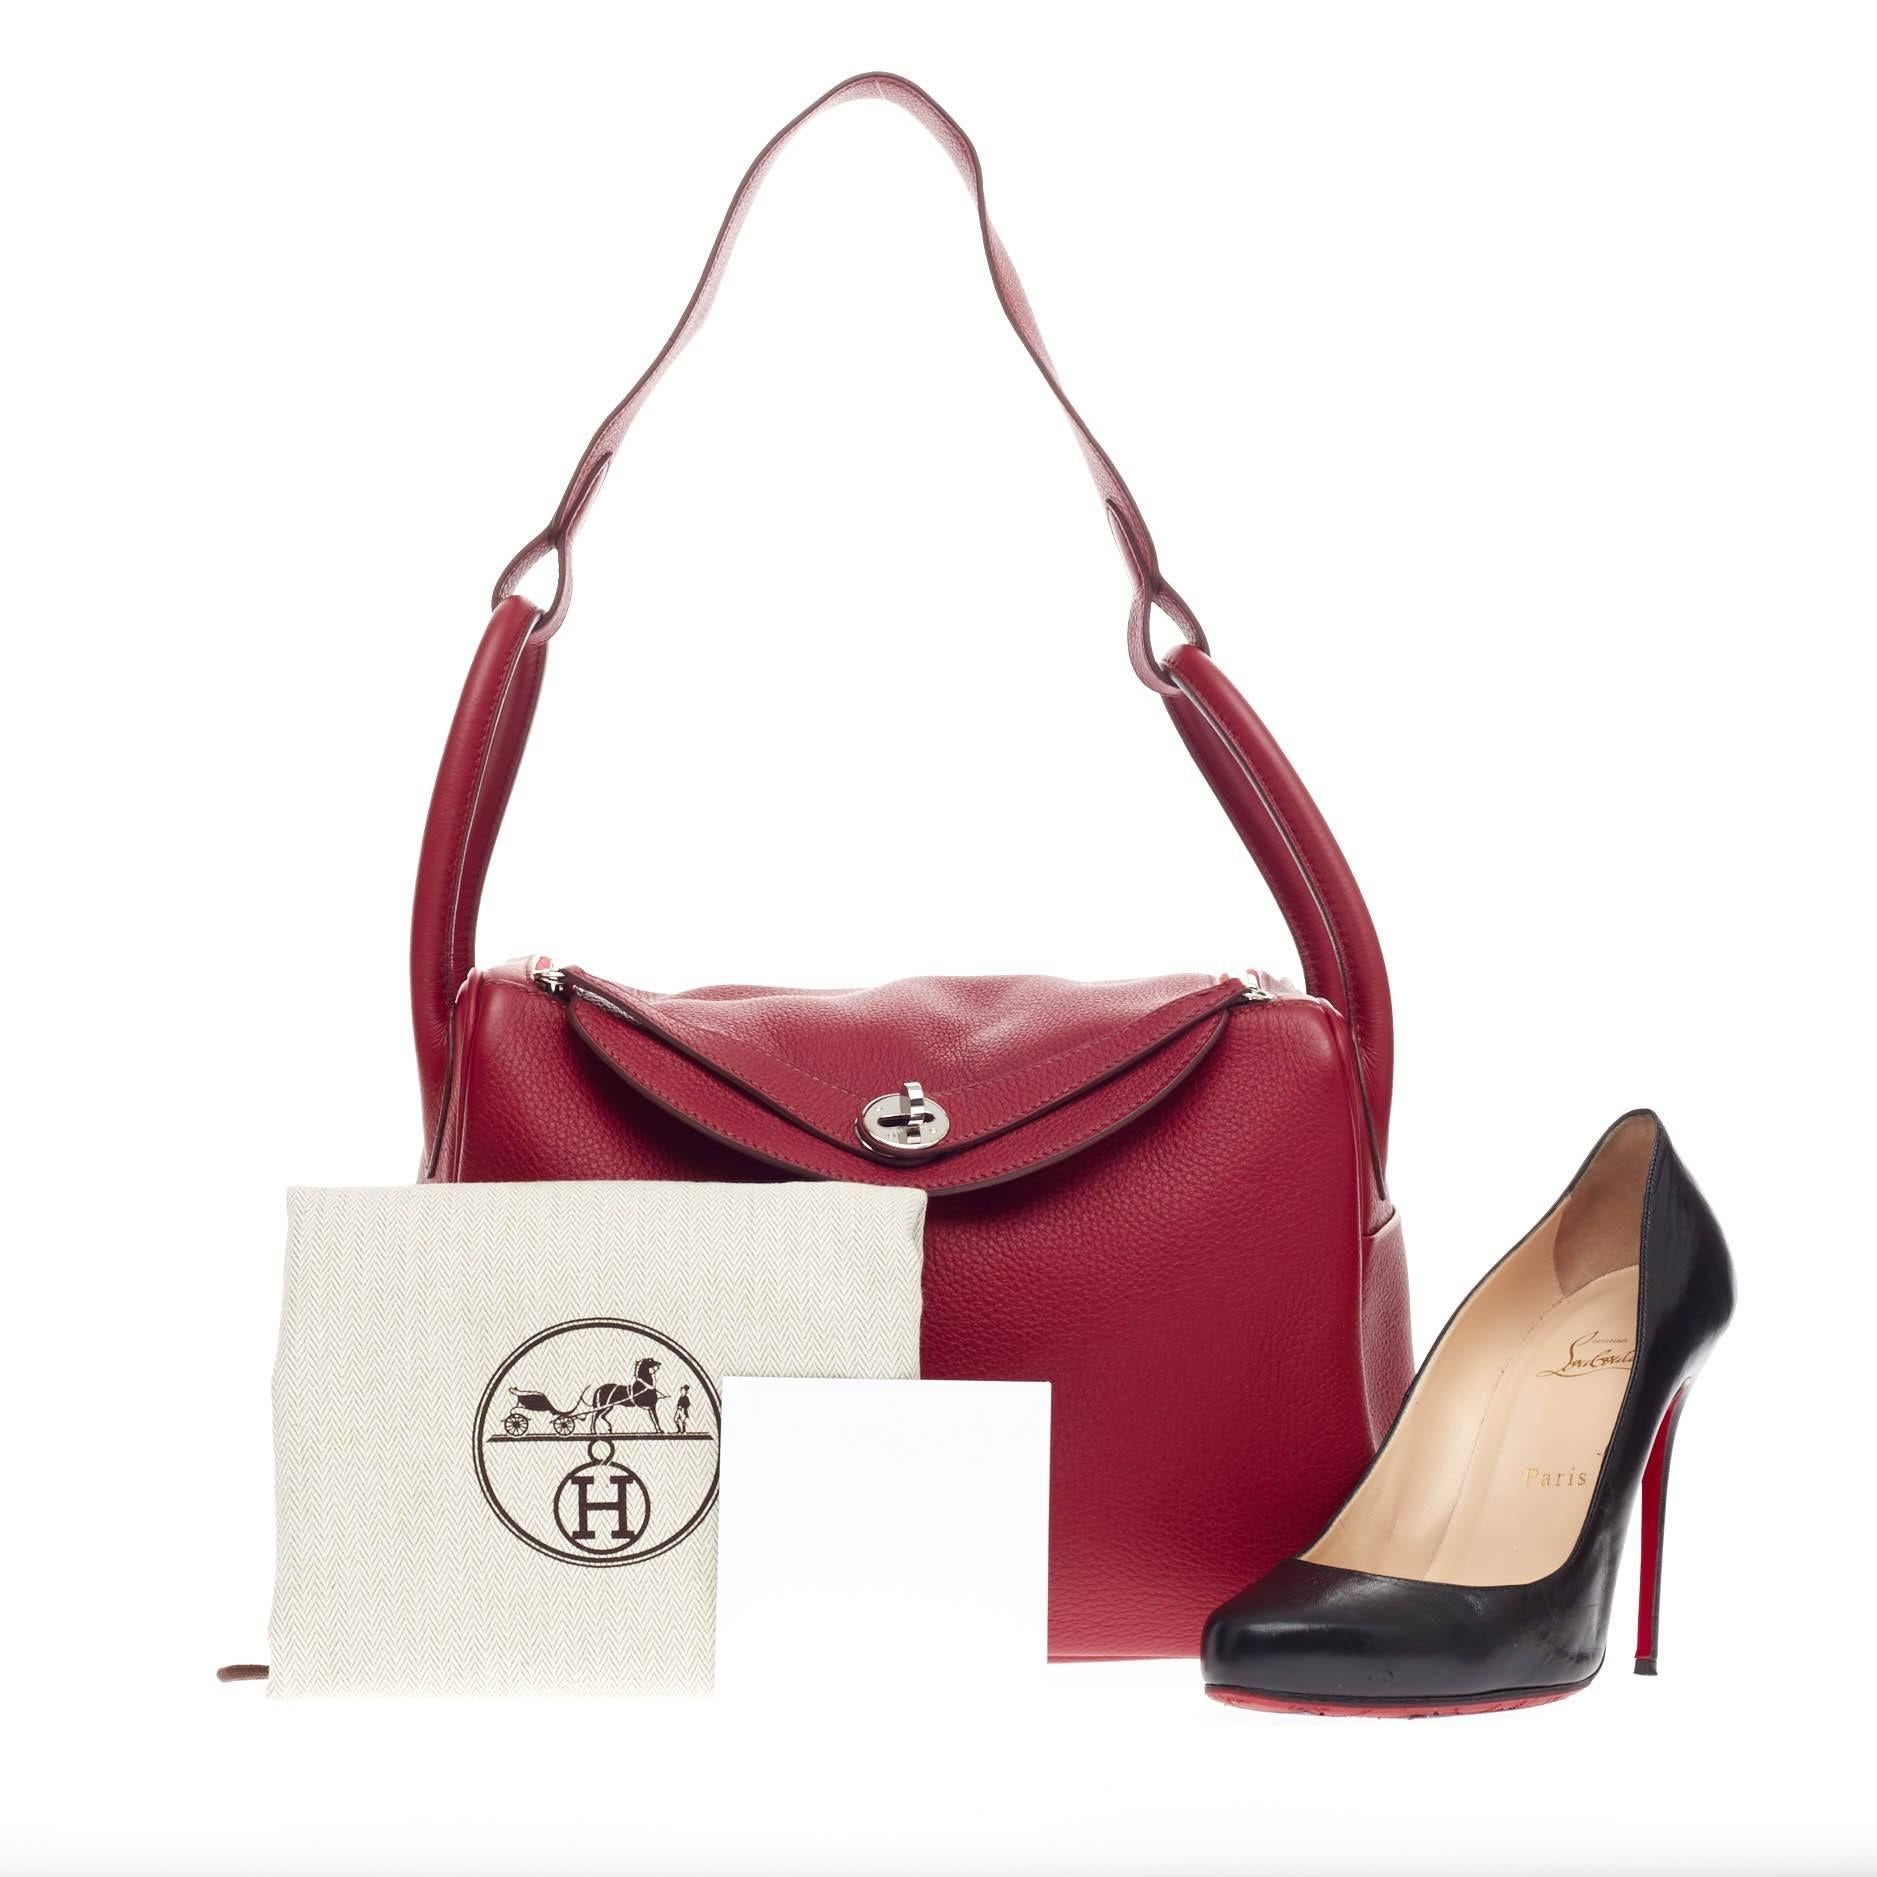 This authentic Hermes Lindy Clemence 30 in beautiful Rouge Garance clemence leather is the perfect understated accessory for the modern woman. Accented in polished palladium hardware,  this no-fuss shoulder bag features dual rolled handles, two